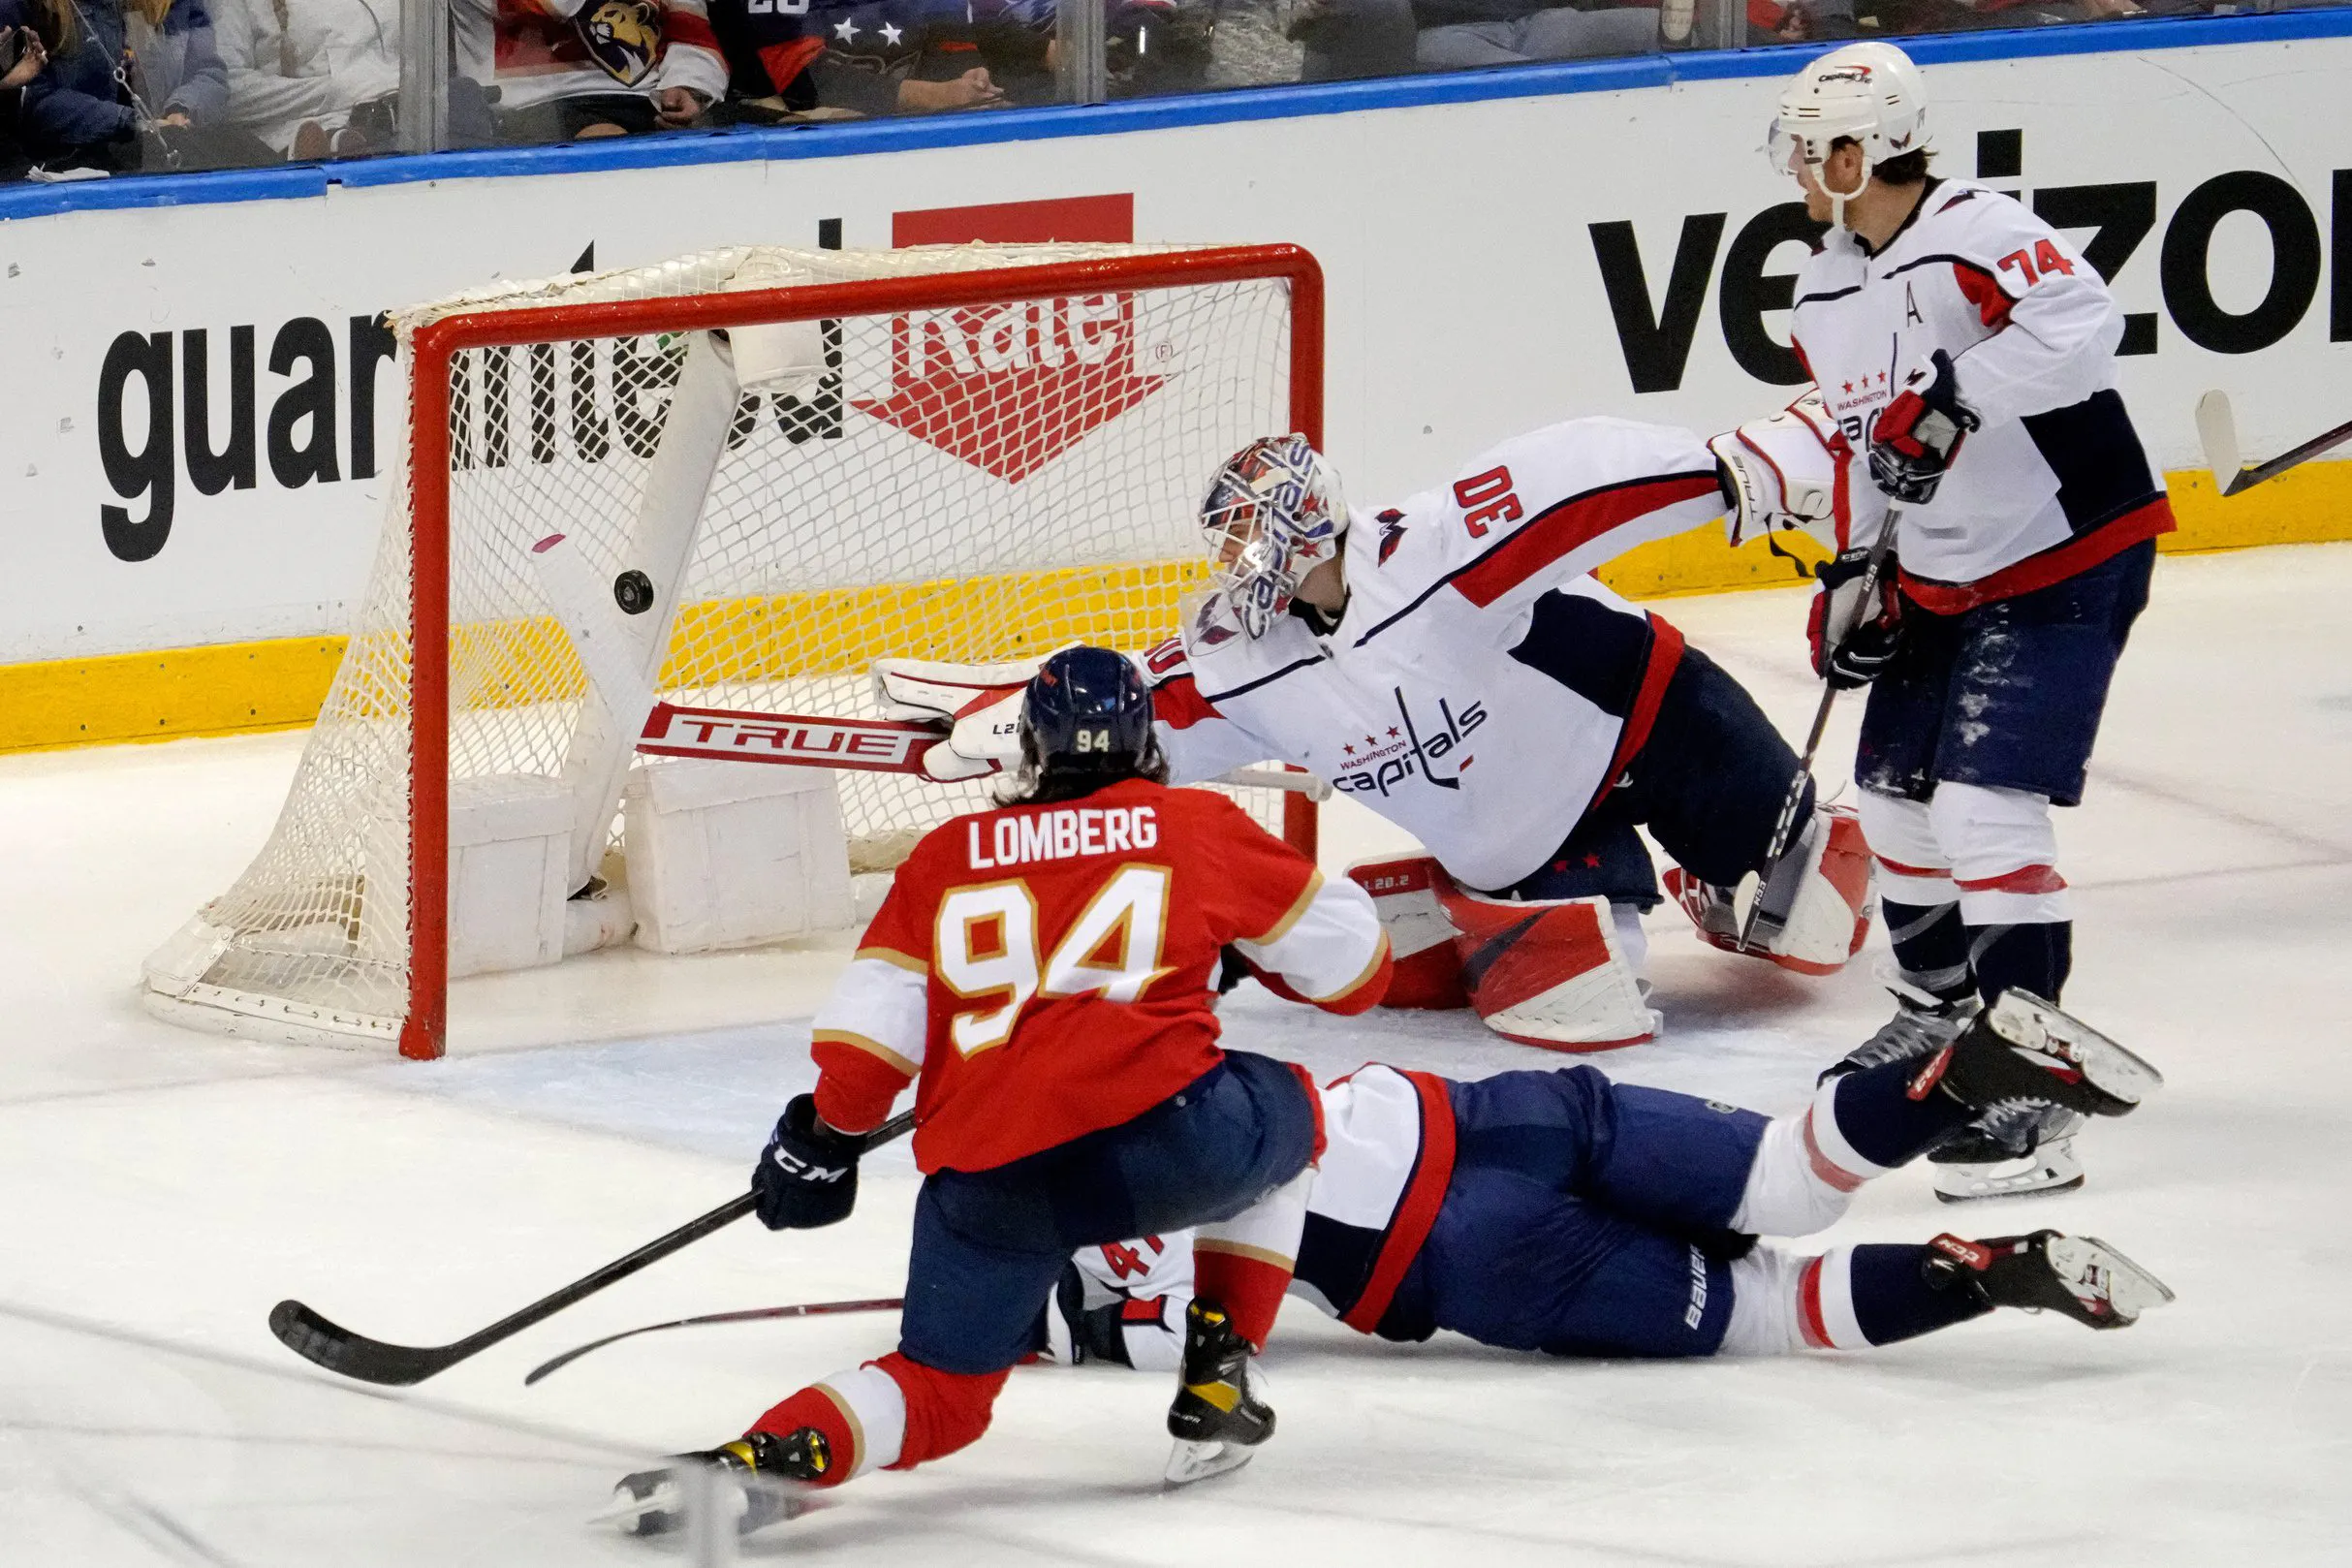 Florida Panthers vs. Washington Capitals: Stanley Cup playoff series preview and pick